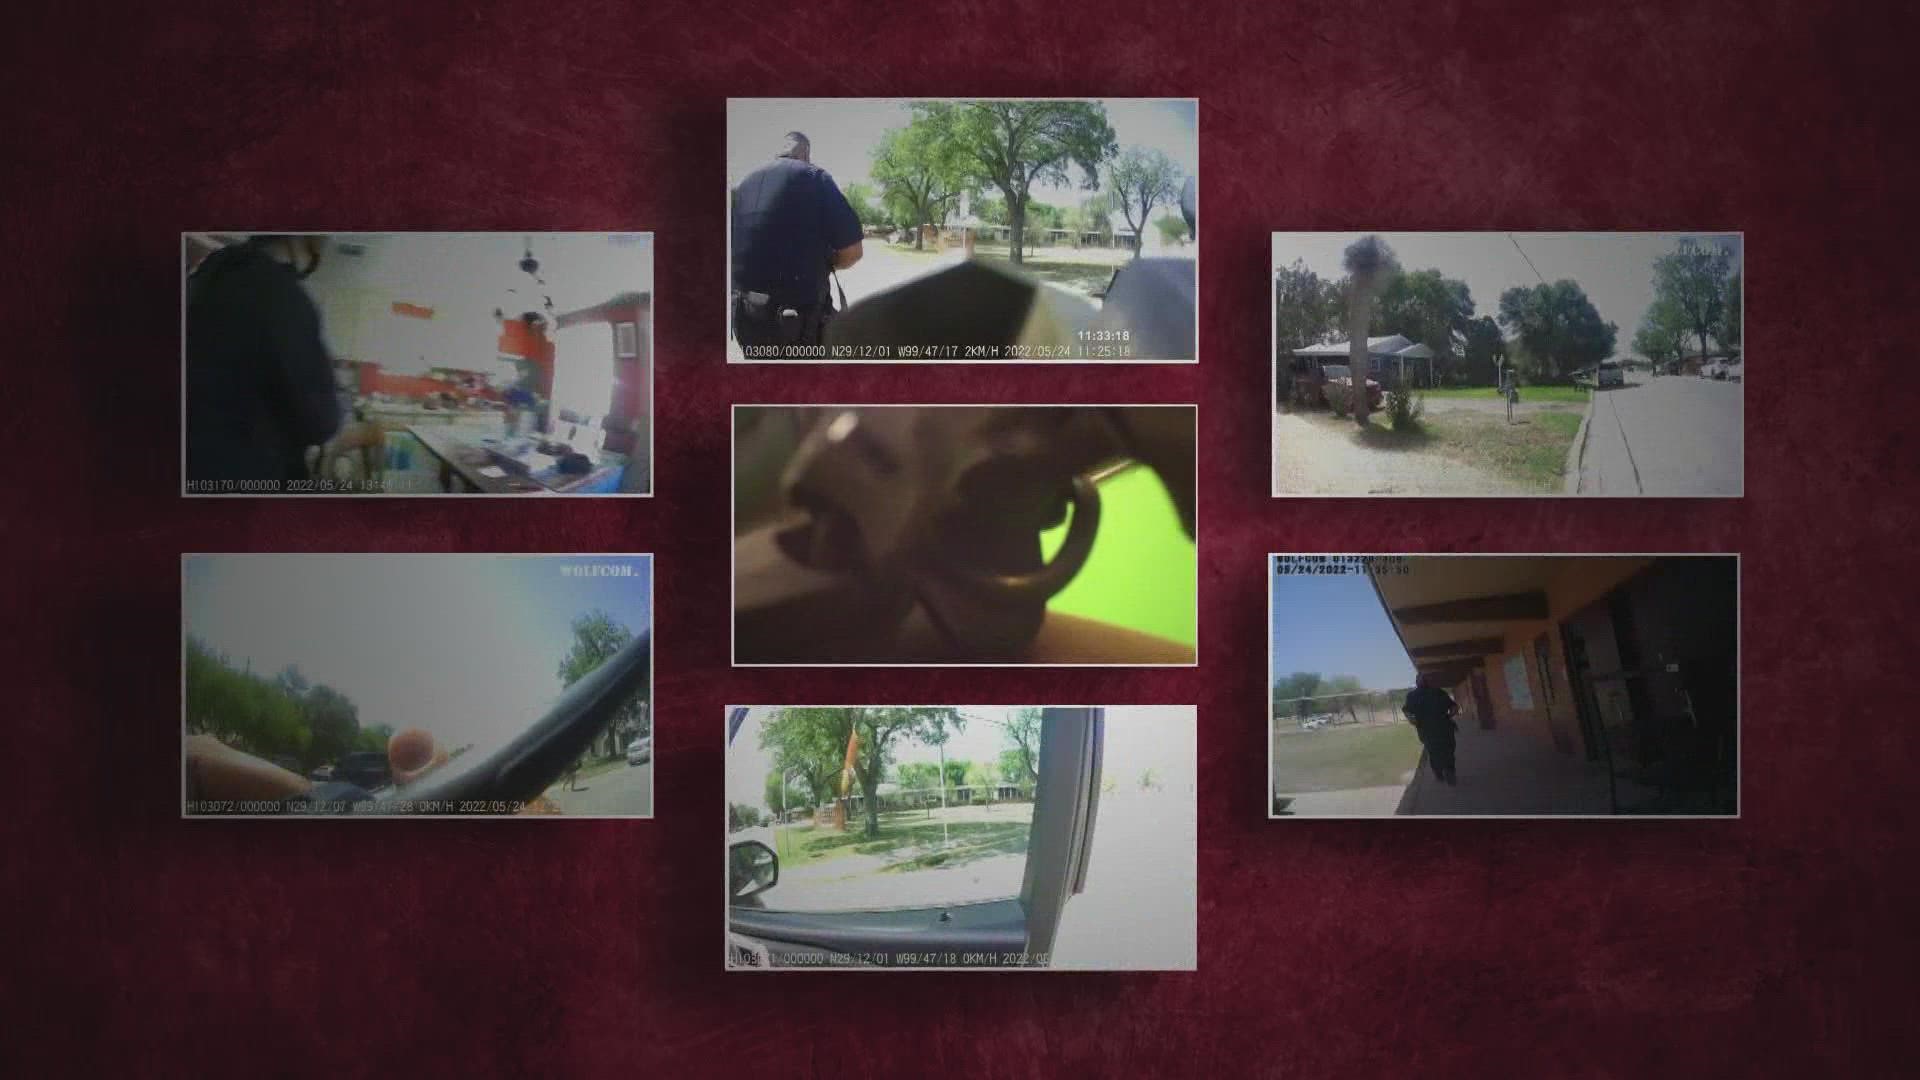 Bodycam videos from multiple officers offer different perspectives of the shooting at Robb Elementary in Uvalde.